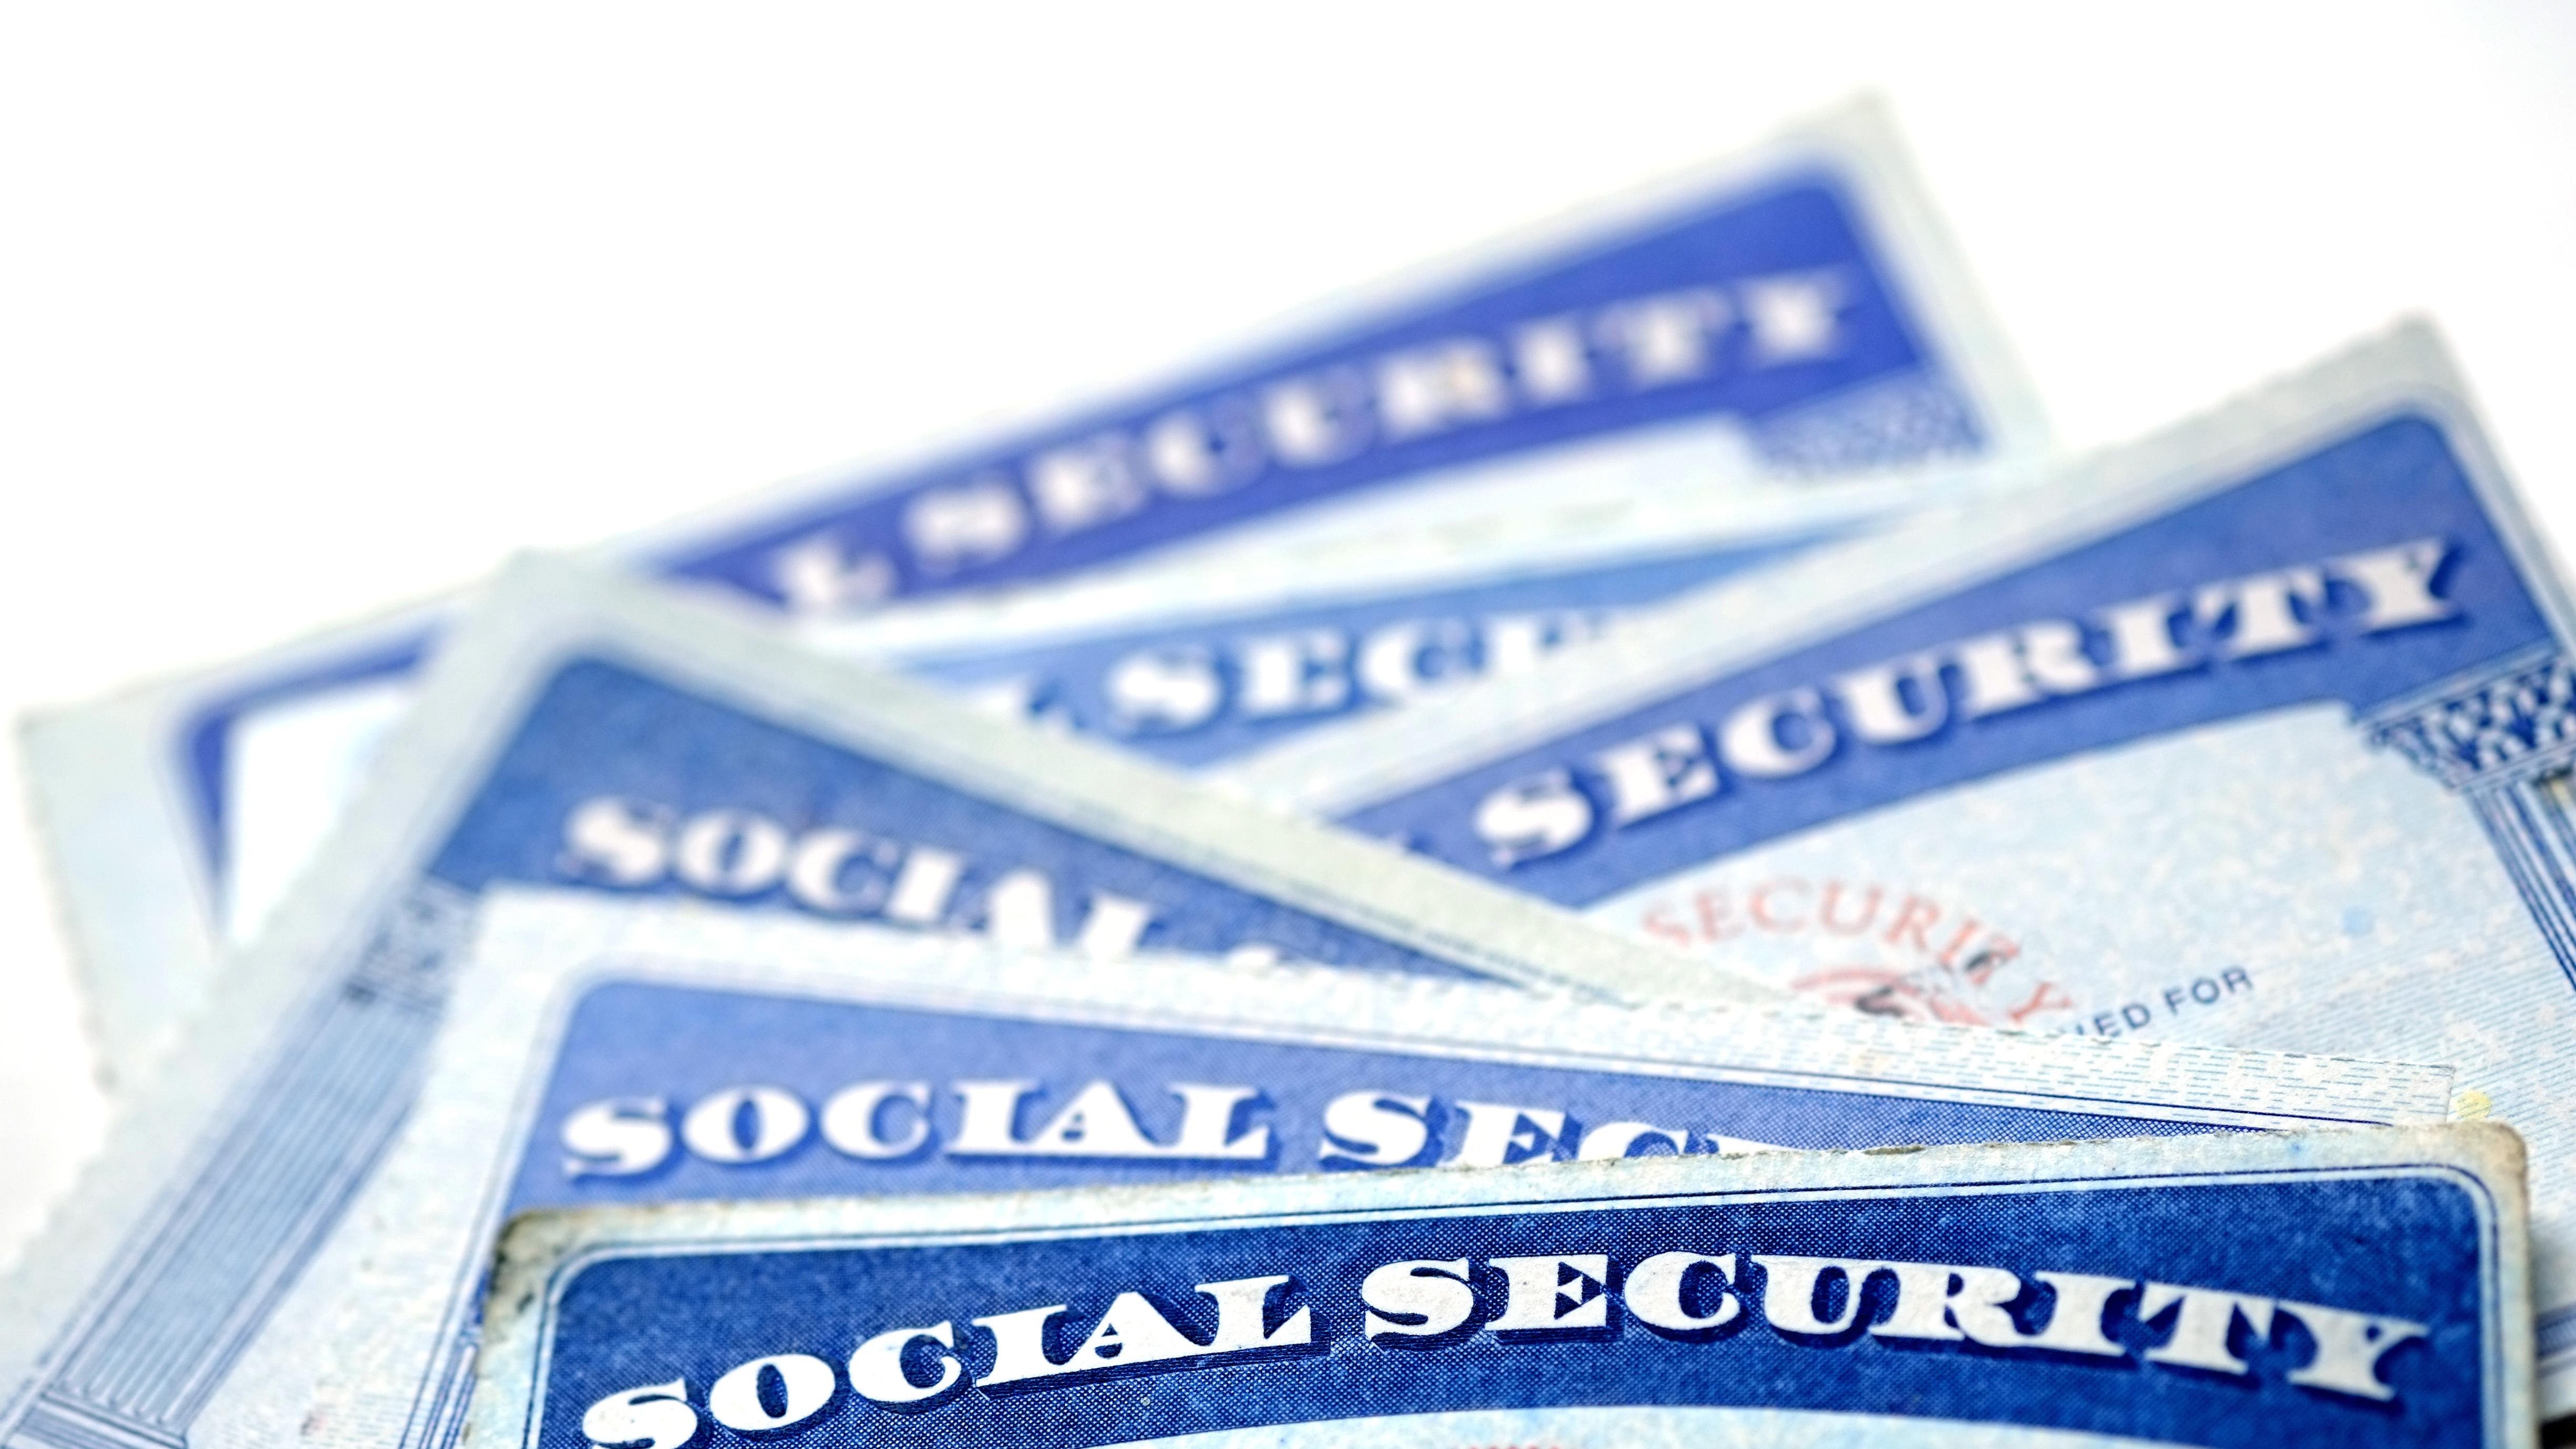 How Do I Change My Citizenship Status For Social Security